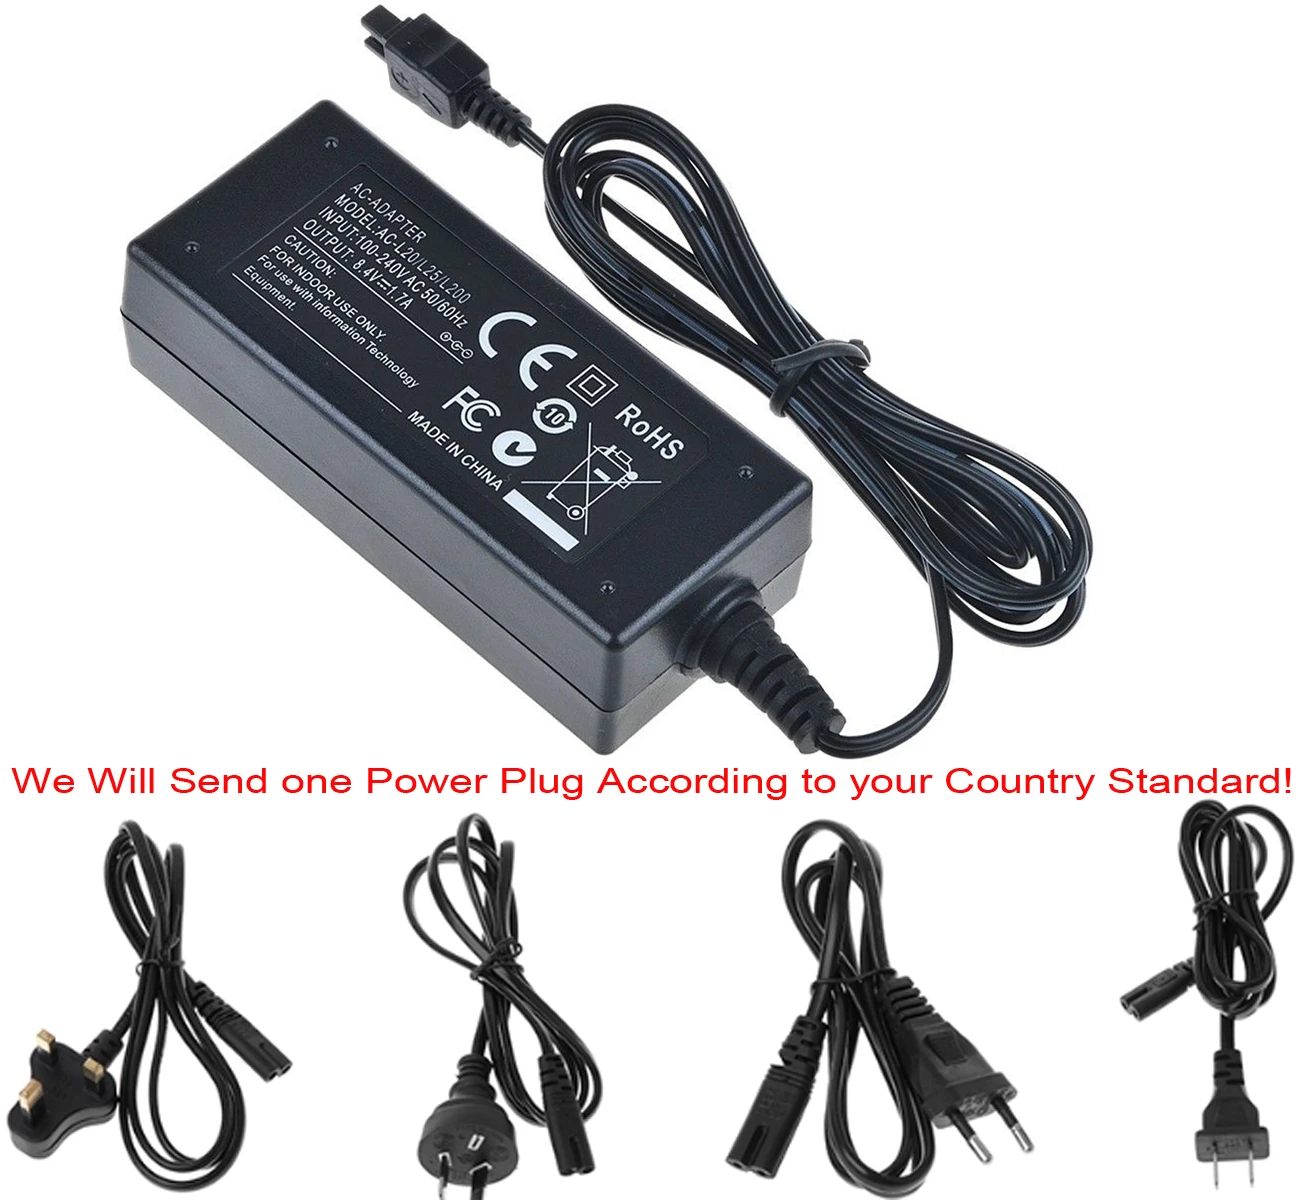 AC Adapter Power Supply for Sony DCR DVD7, DVD7E, DCR HC90, HC90E, DCR  HC1000, HC1000E, DCR PC1000, PC1000E Handycam Camcorder|Camera Charger| -  AliExpress